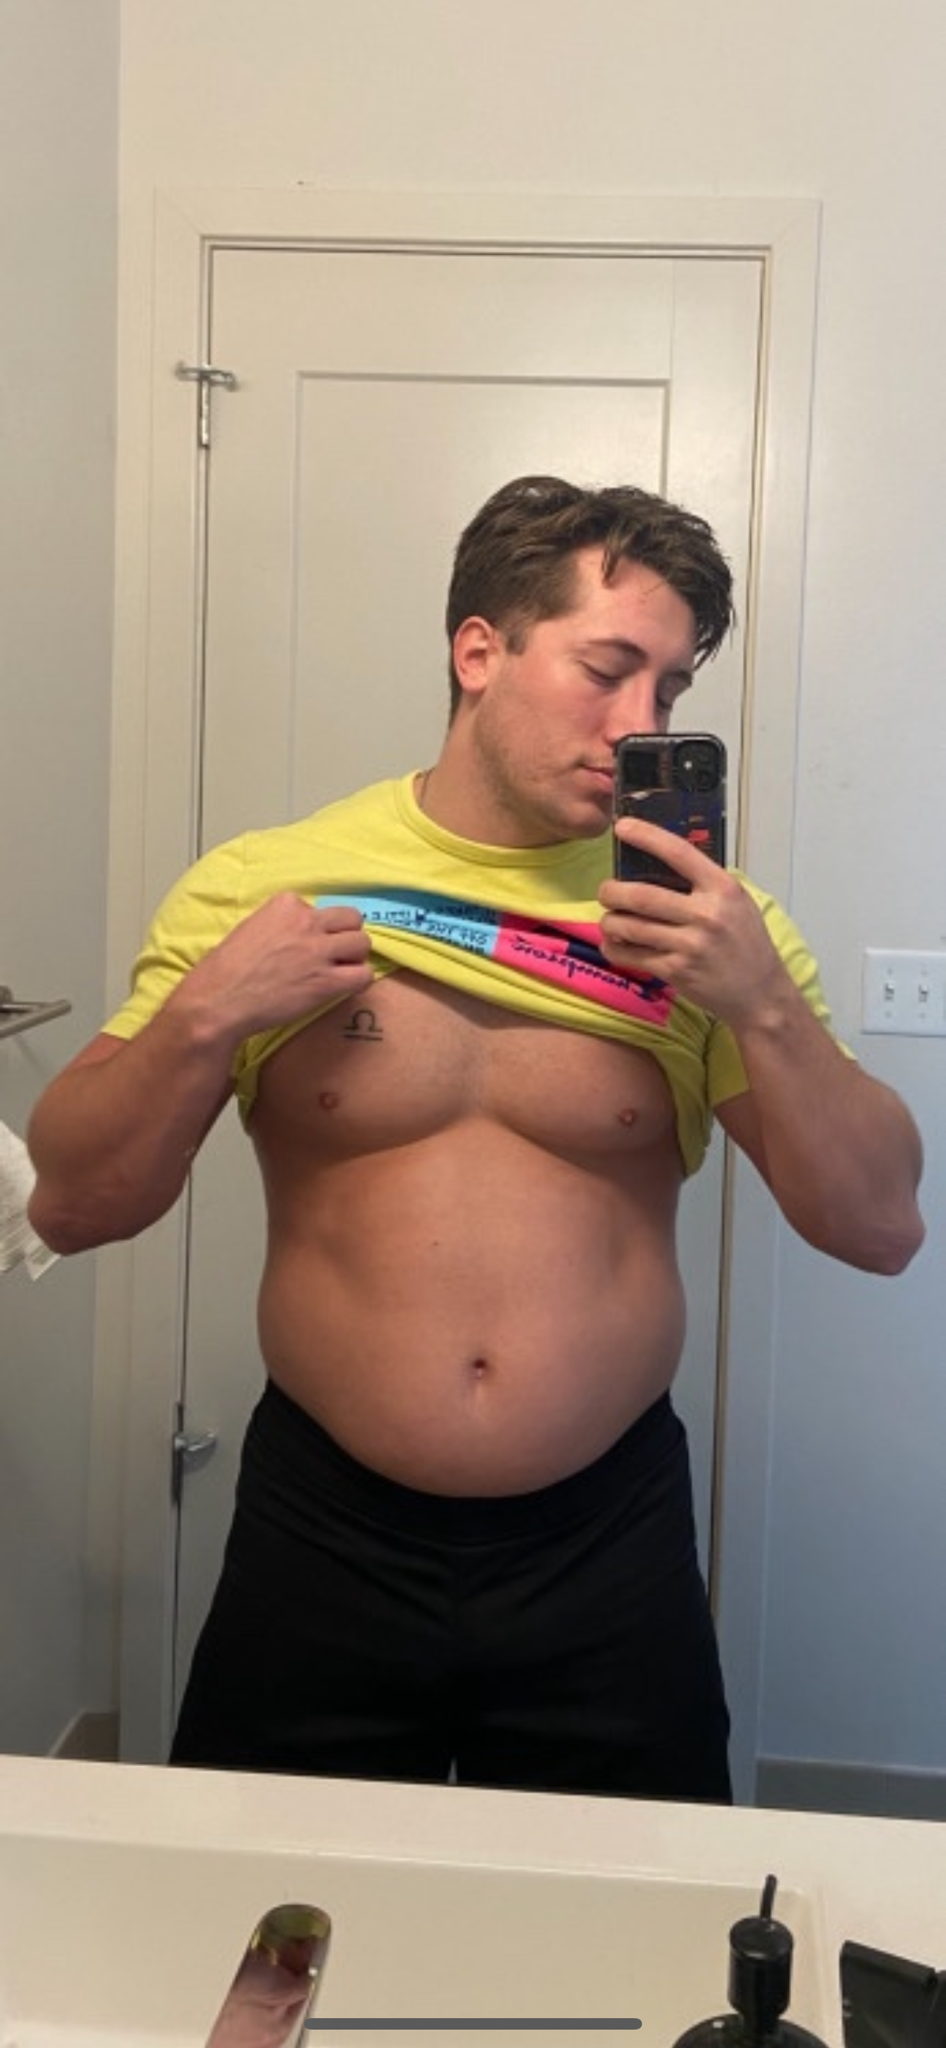 thic-as-thieves:Just a couple month difference adult photos